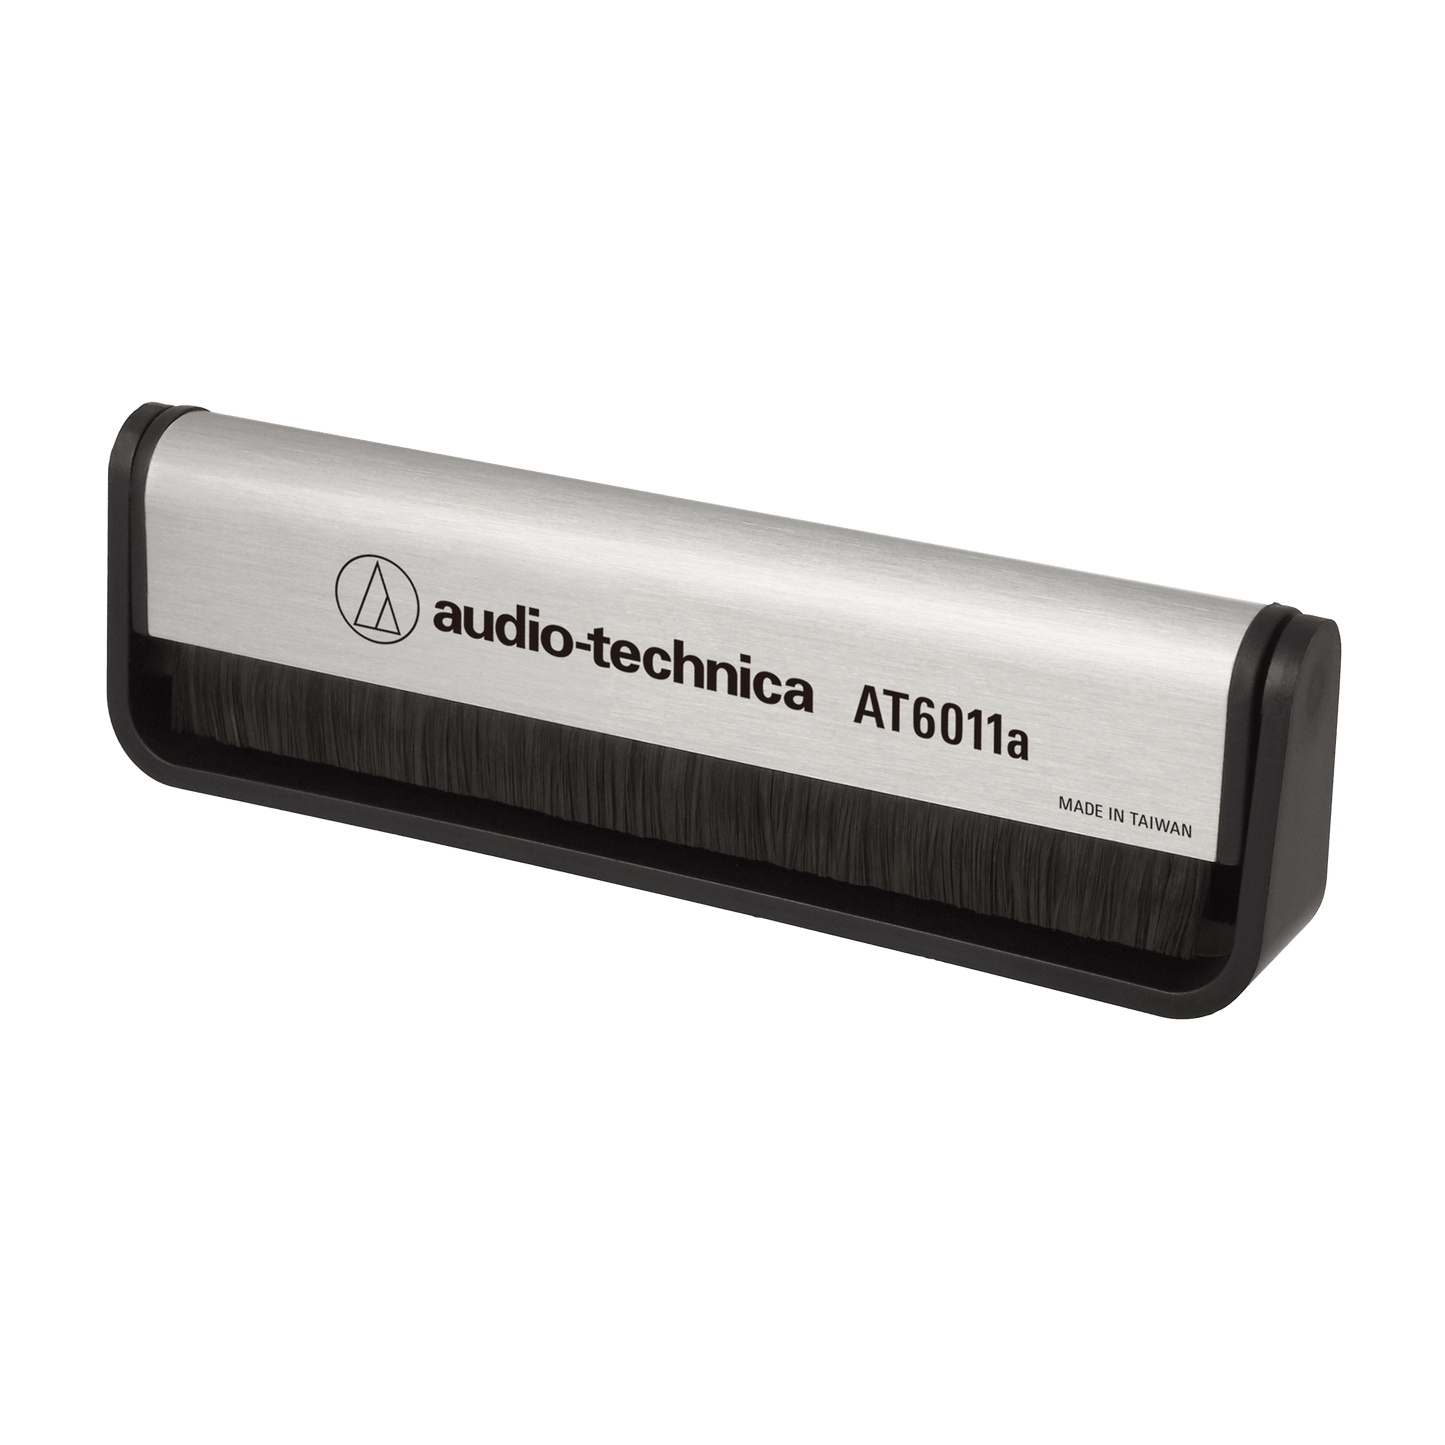 Audio-Technica AT6011a Record Cleaning Brush